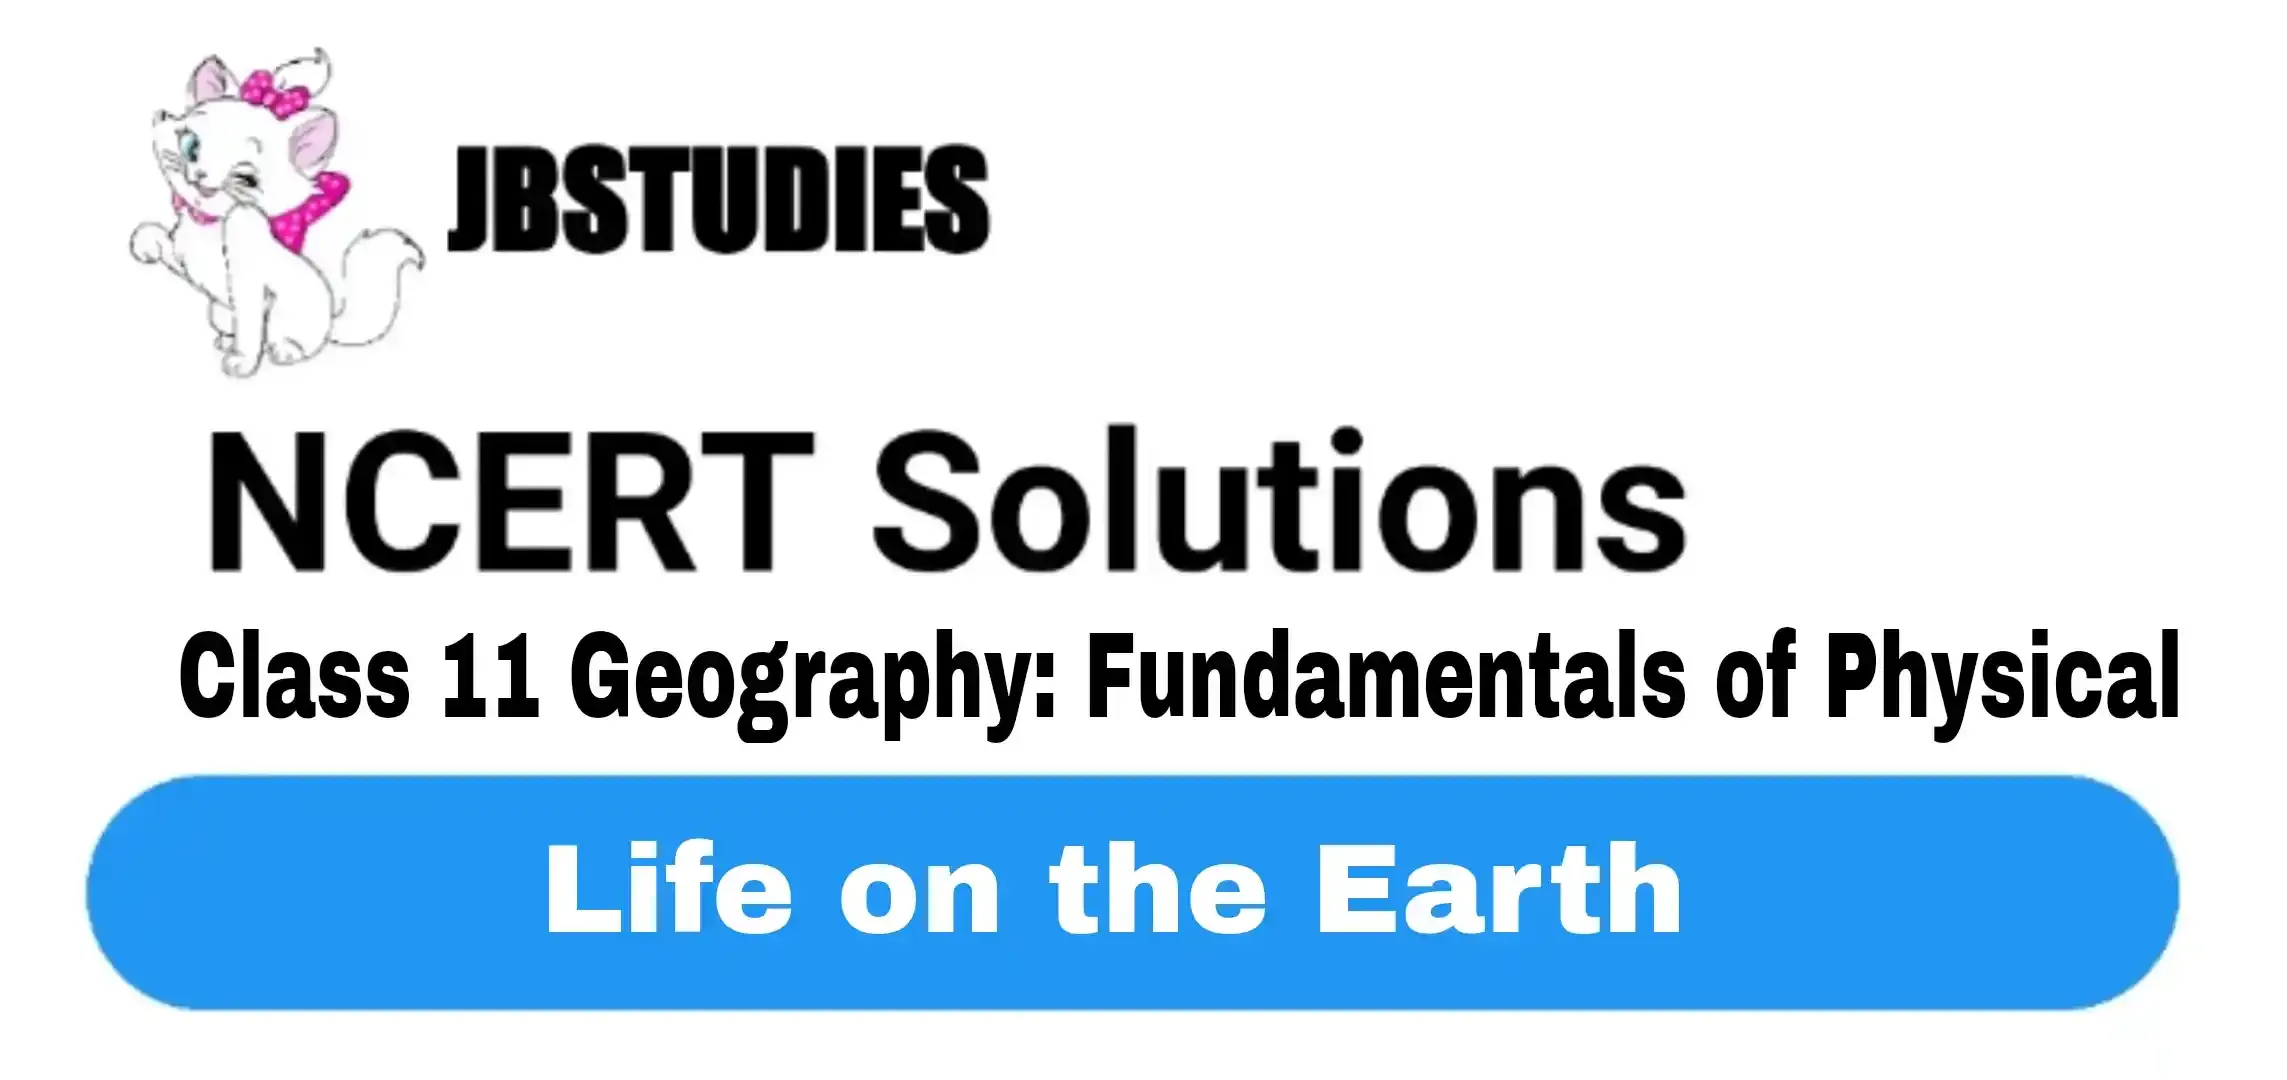 Solutions Class 11 Geography Chapter-15 Life on the Earth